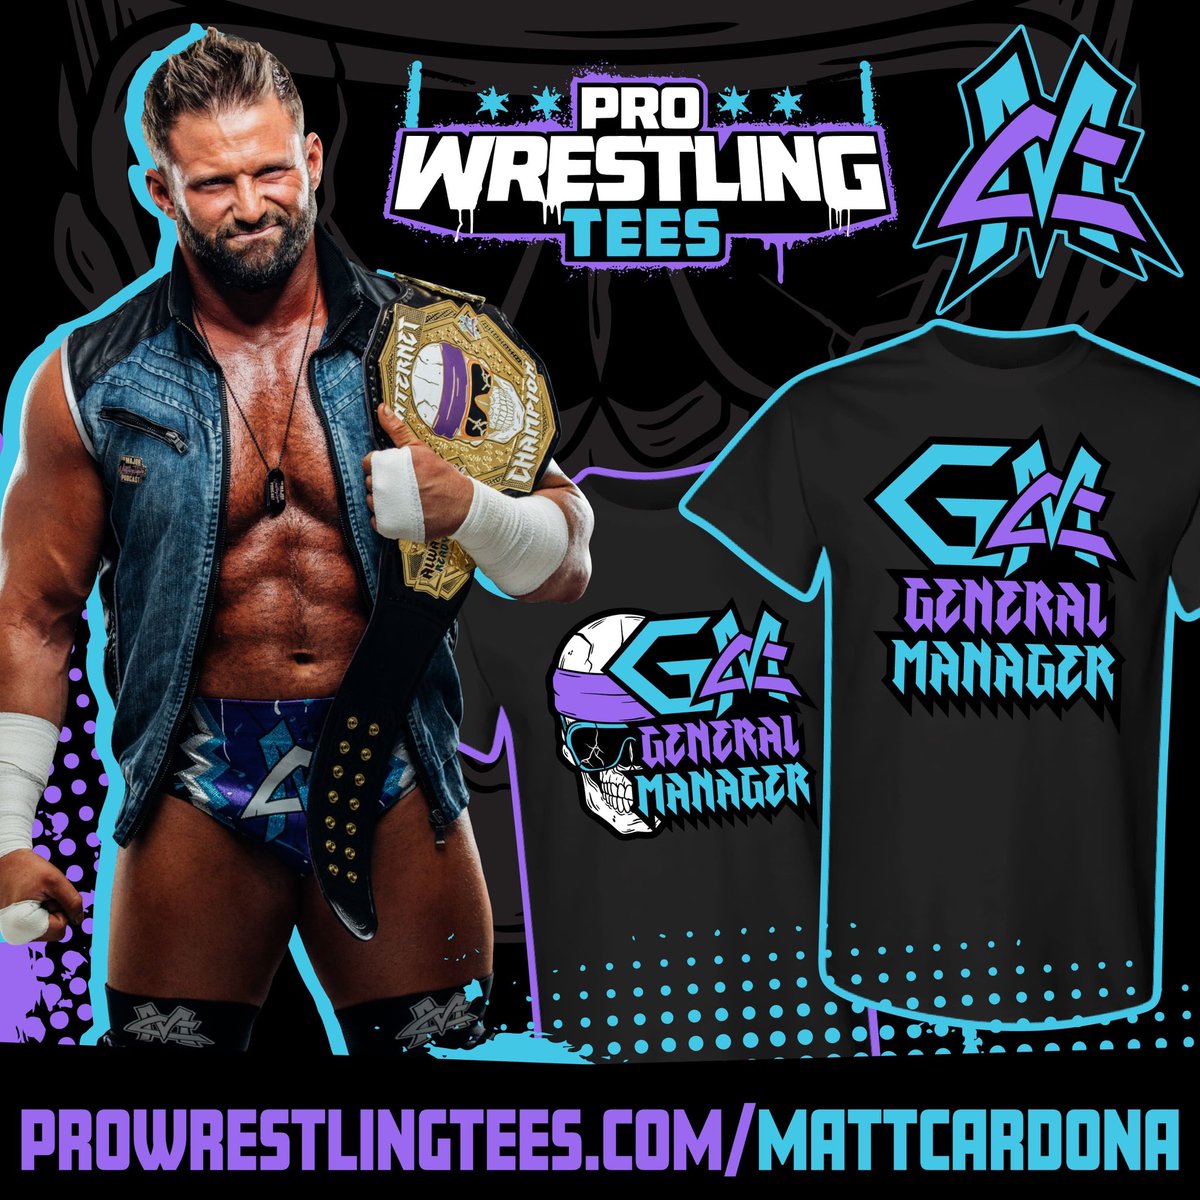 I’m the new @GCWrestling_ General Manager! I love the GCW Universe…and I know they’ll all buy my new shirts on @PWTees! prowrestlingtees.com/mattcardona